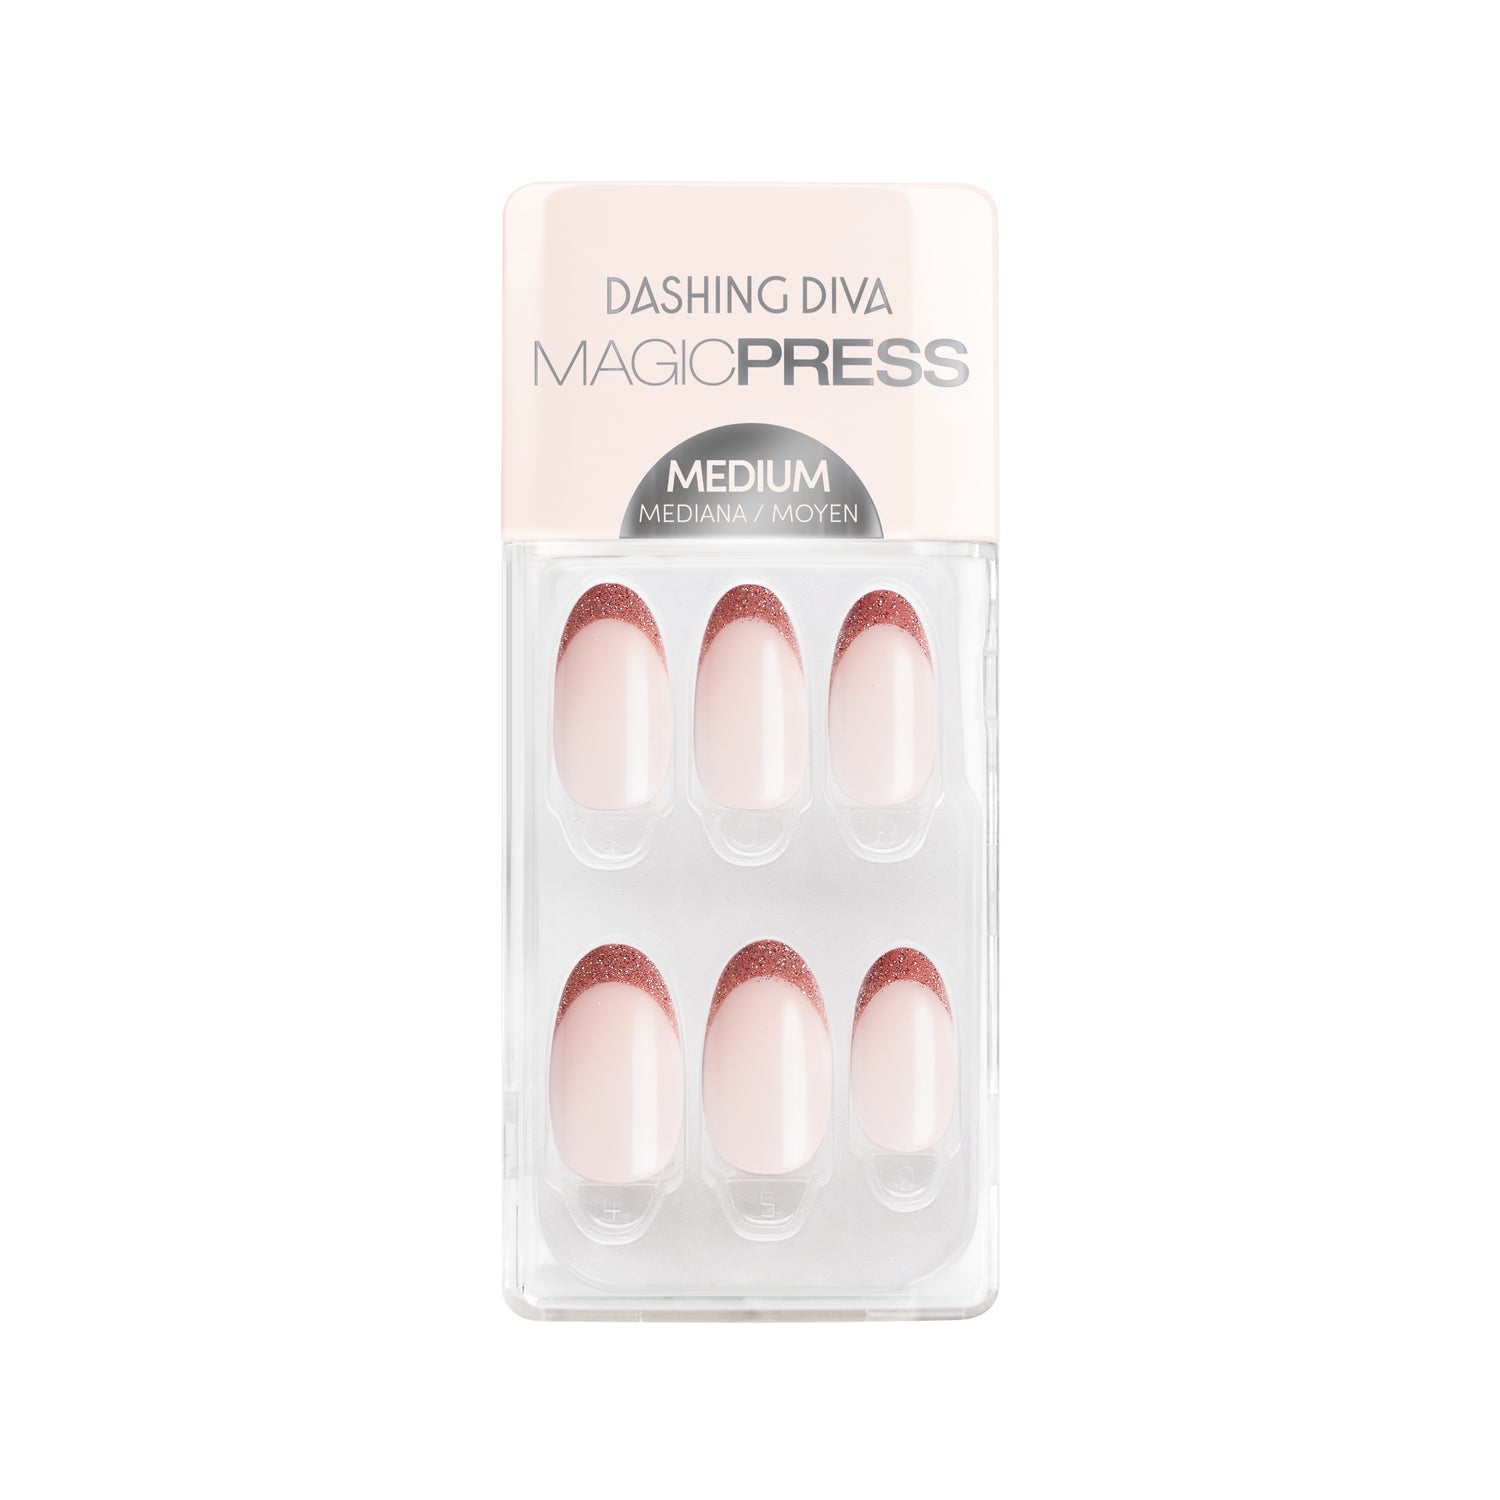 Medium length, almond shape, glossy finish. Semi-sheer peachy nude press-on gel nails featuring glittered pink french tips.